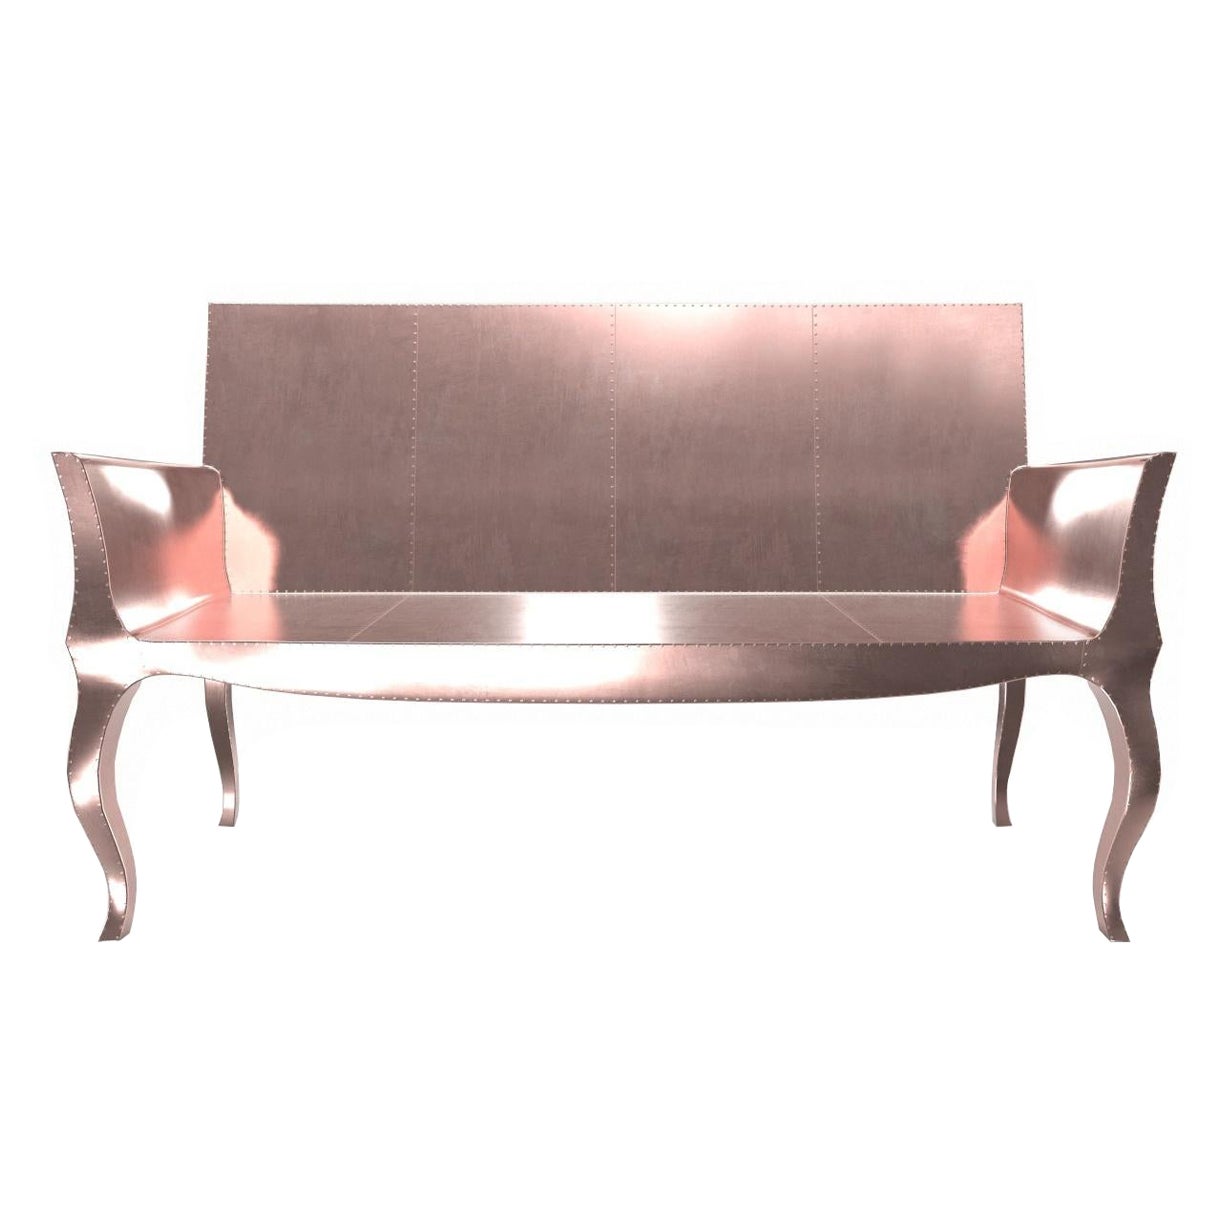 Louise Settee Art Deco Daybeds in Smooth Copper by Paul Mathieu For S Odegard  For Sale